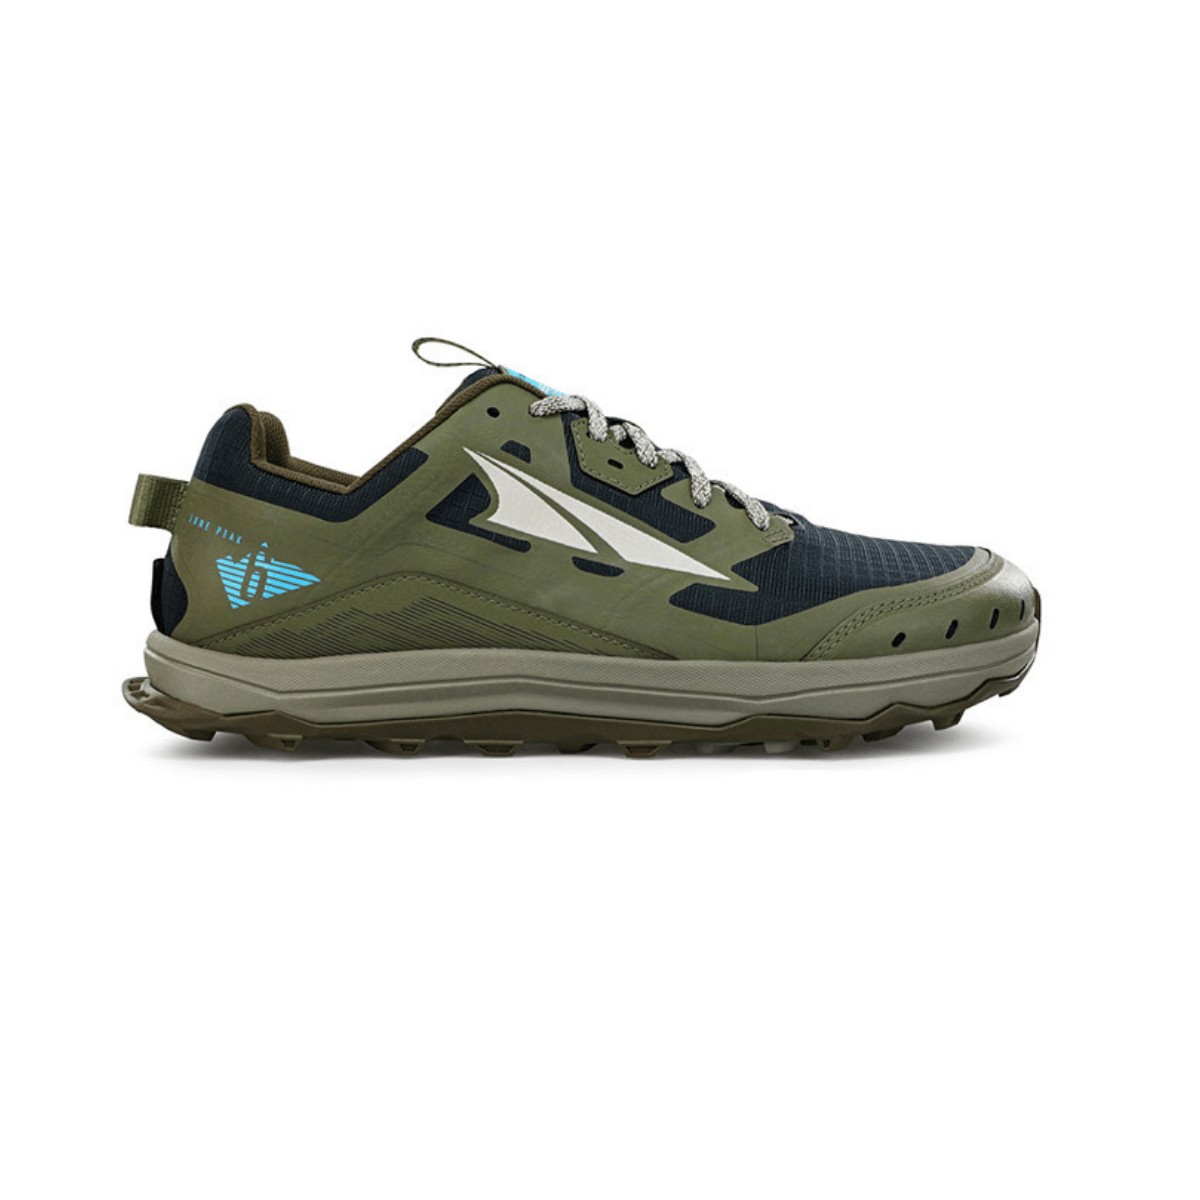 Chaussures Altra Lone Peak 6 Vert Olive SS22, Taille 42 - EUR